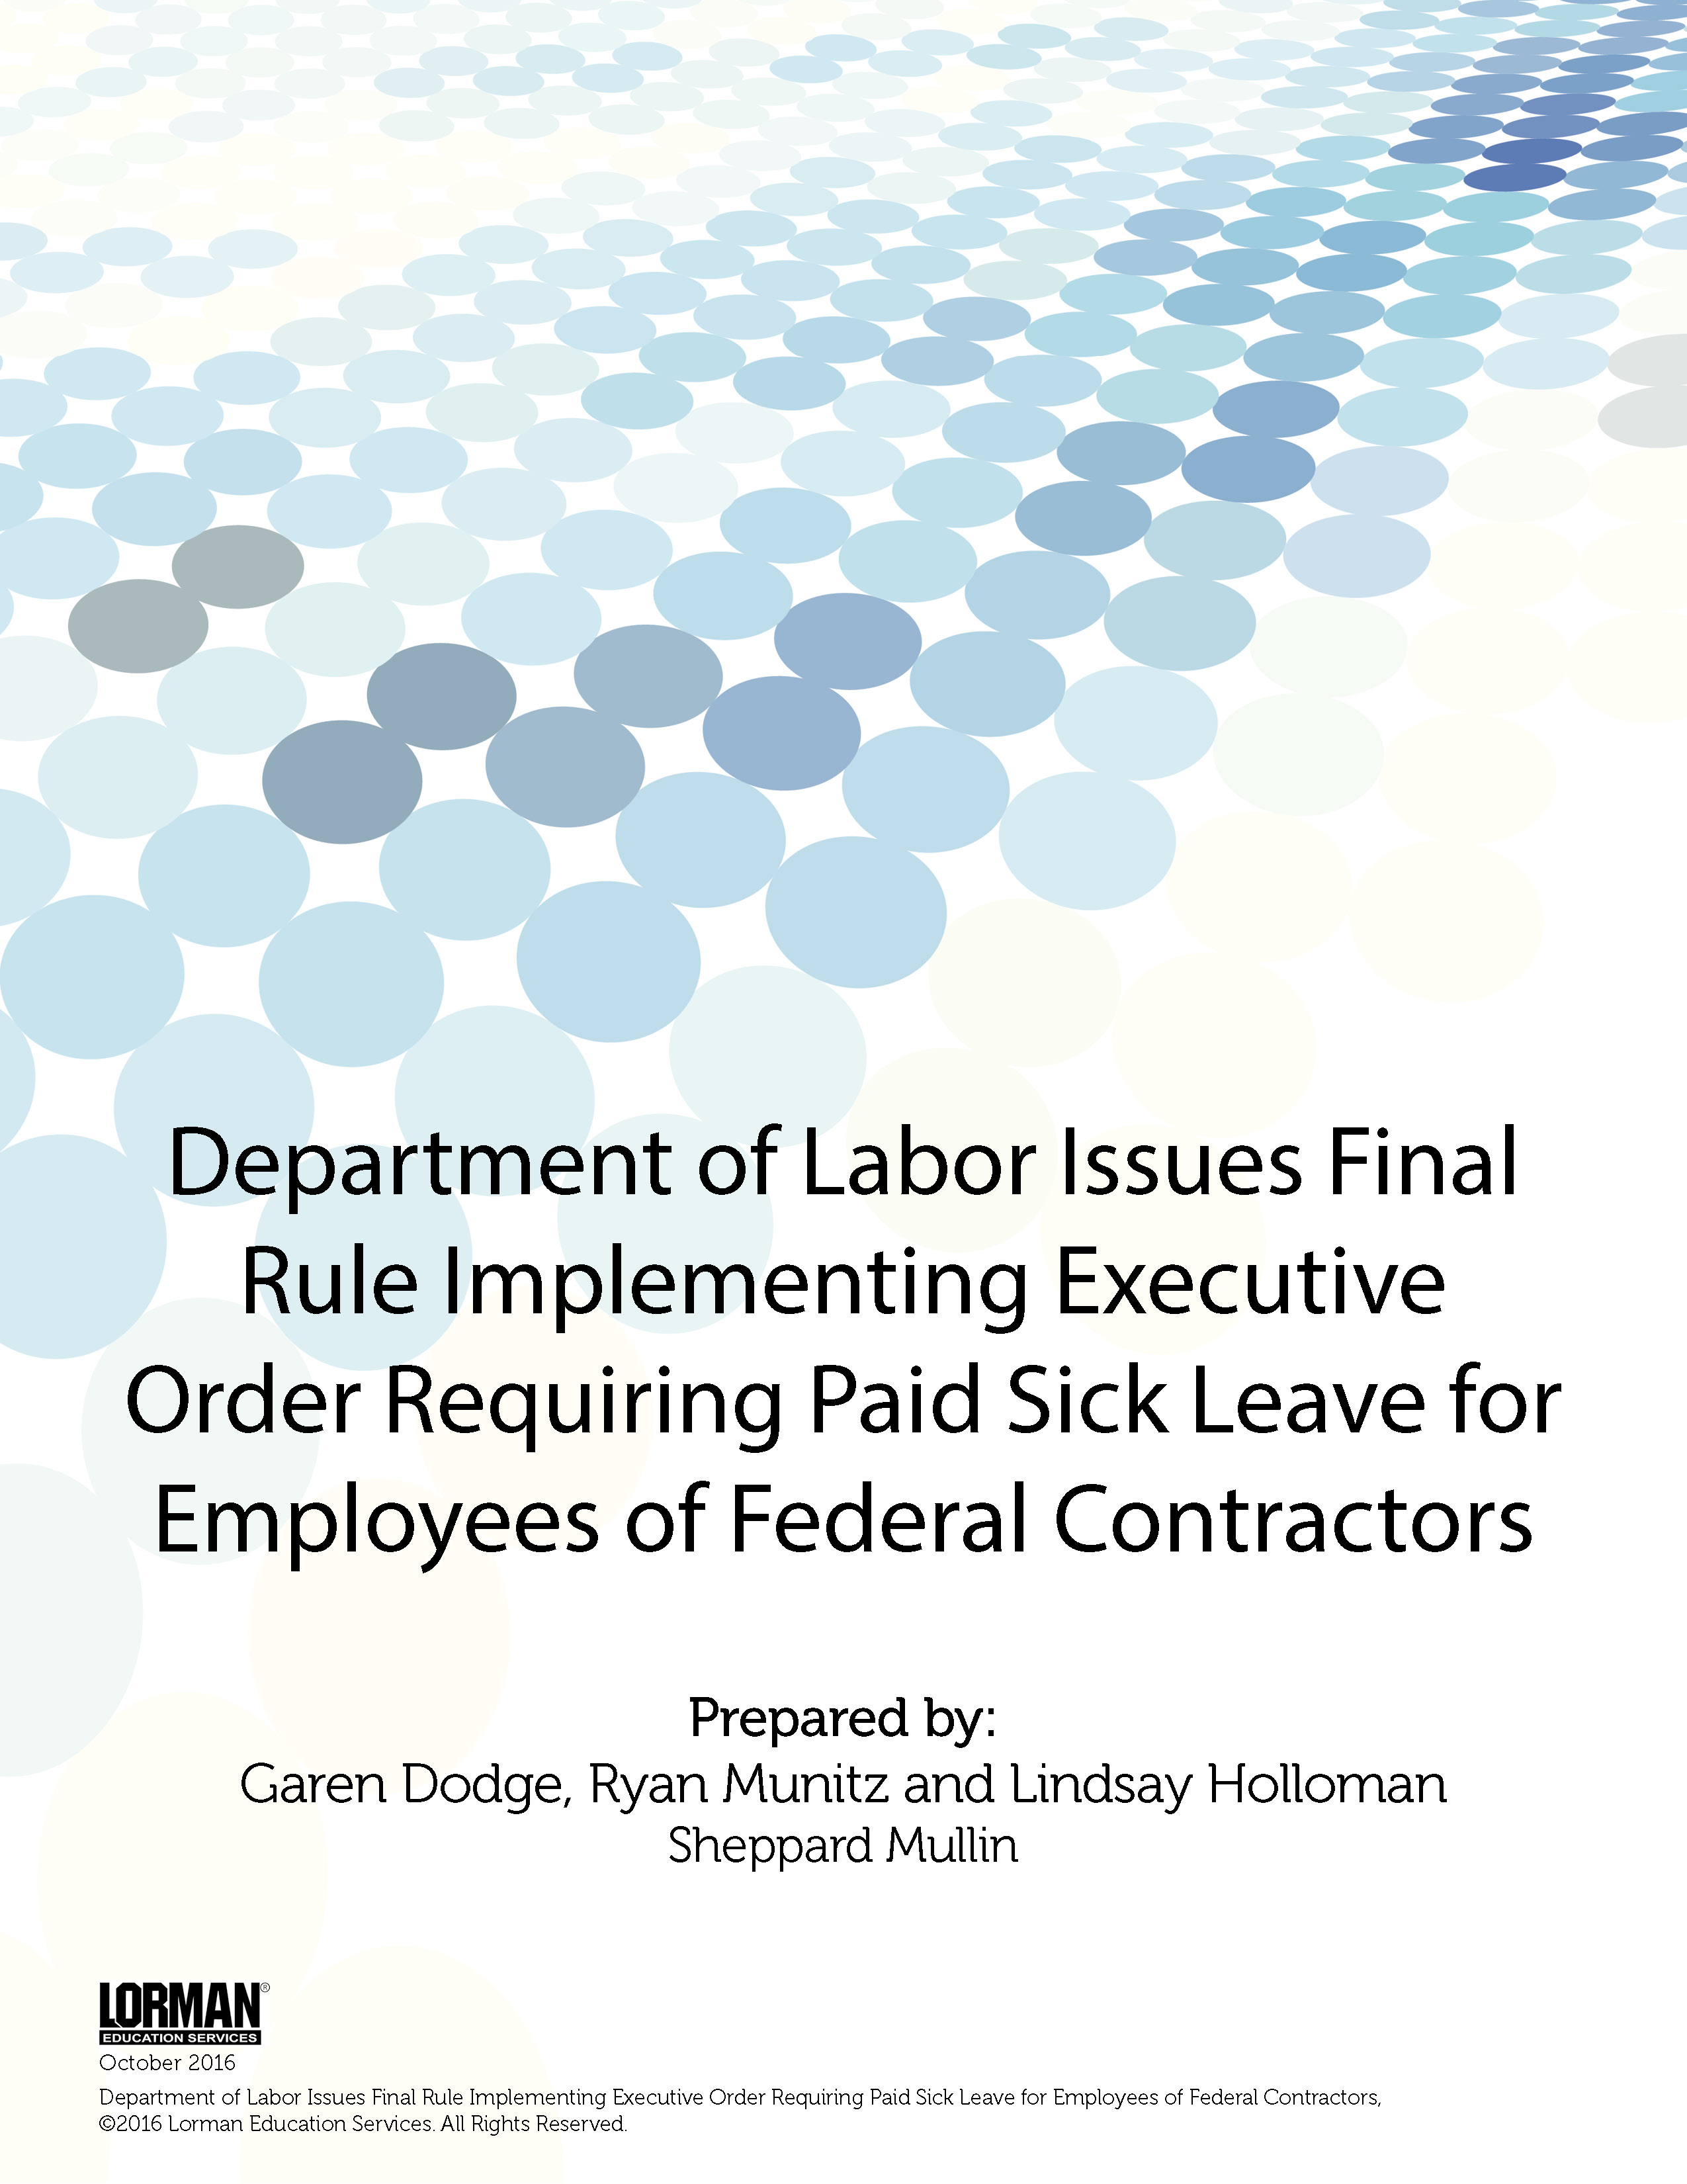 DOL Rule Implements Executive Order Requiring Paid Sick Leave for Employees of Federal Contractors